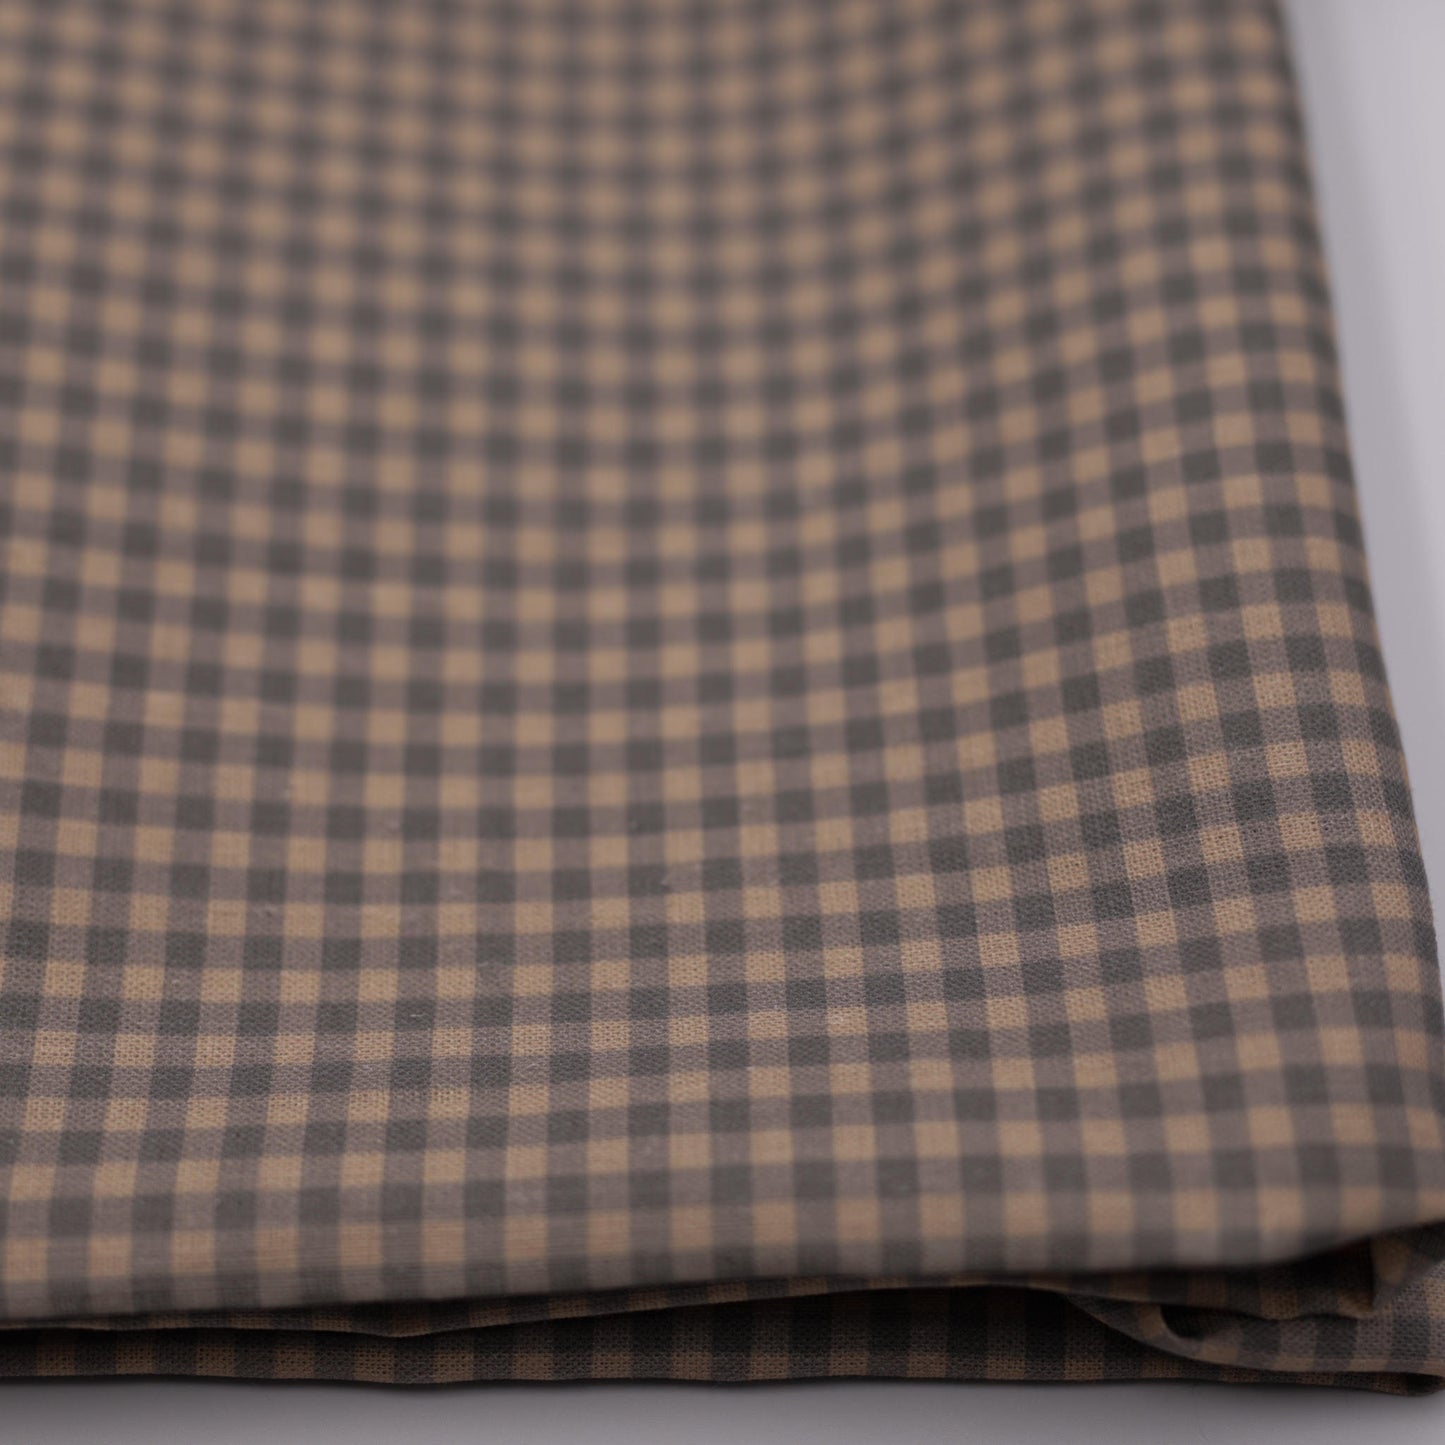 Taupe gingham 0.5 cm 100% linen fabric 005